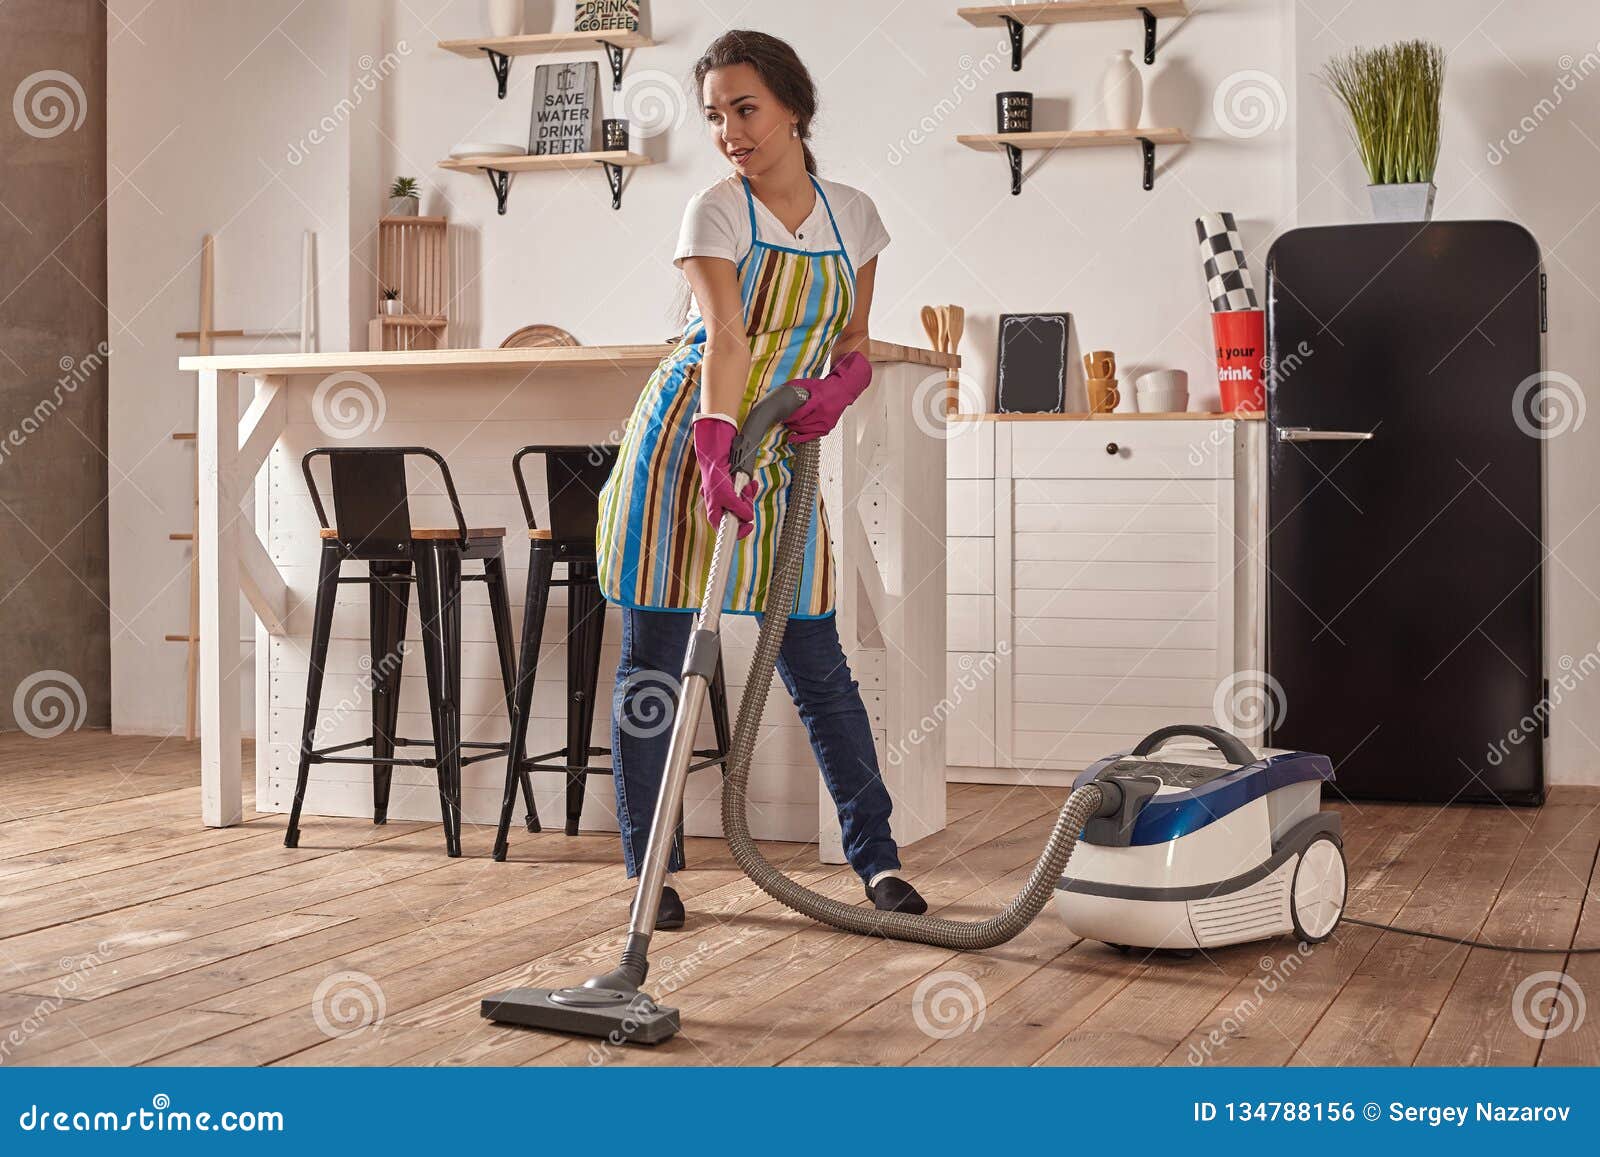 Young Woman Using Vacuum Cleaner In Home Kitchen Floor Doin